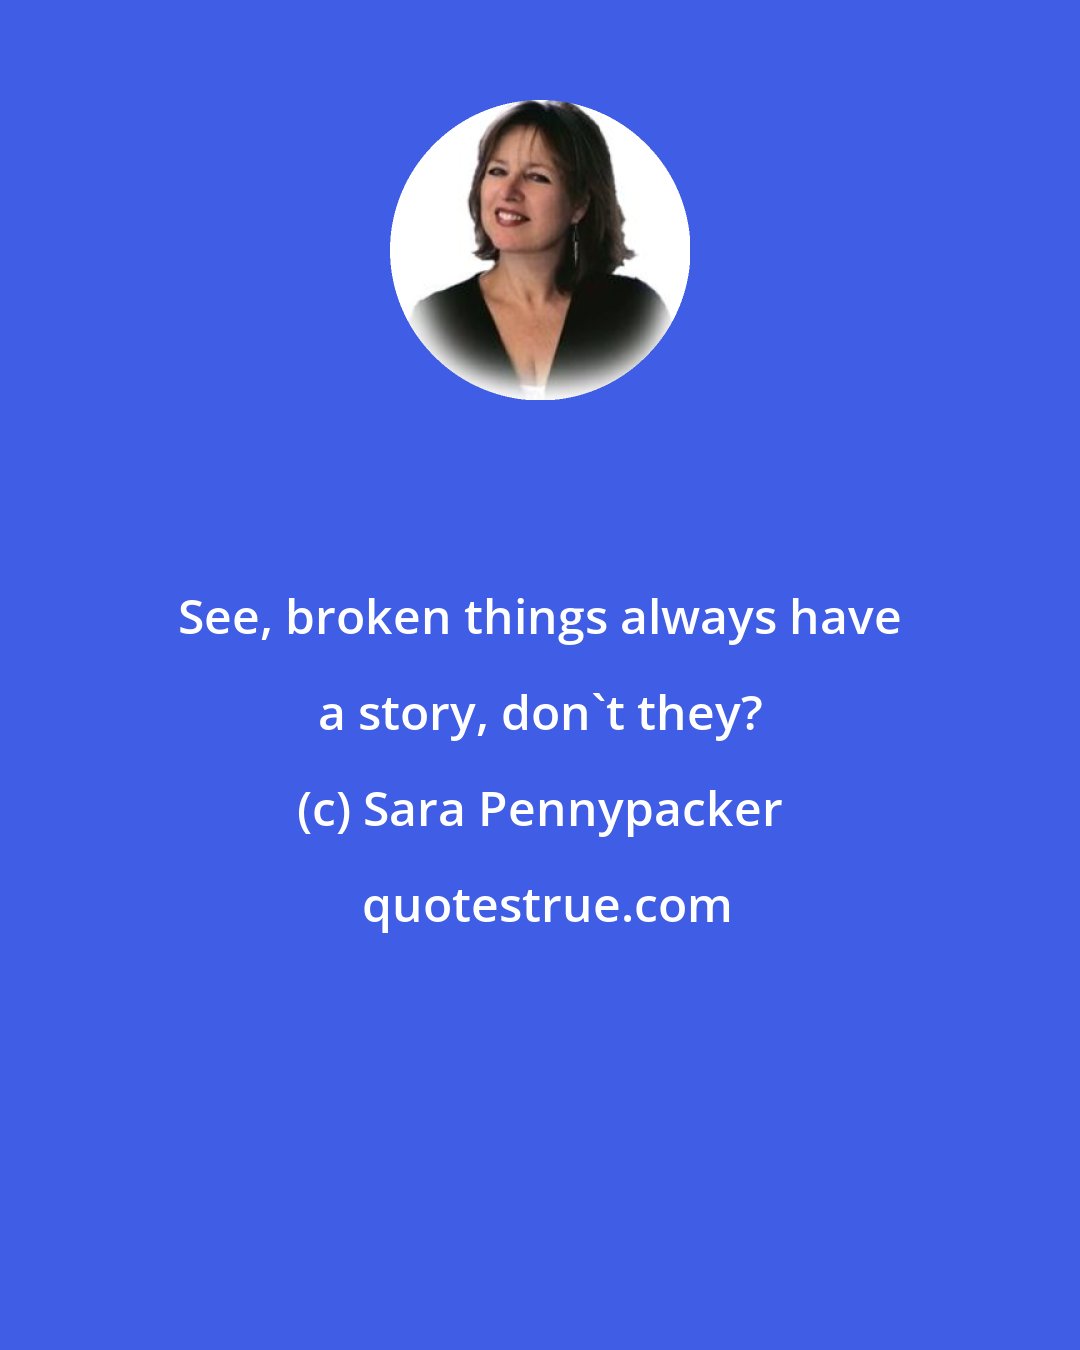 Sara Pennypacker: See, broken things always have a story, don't they?